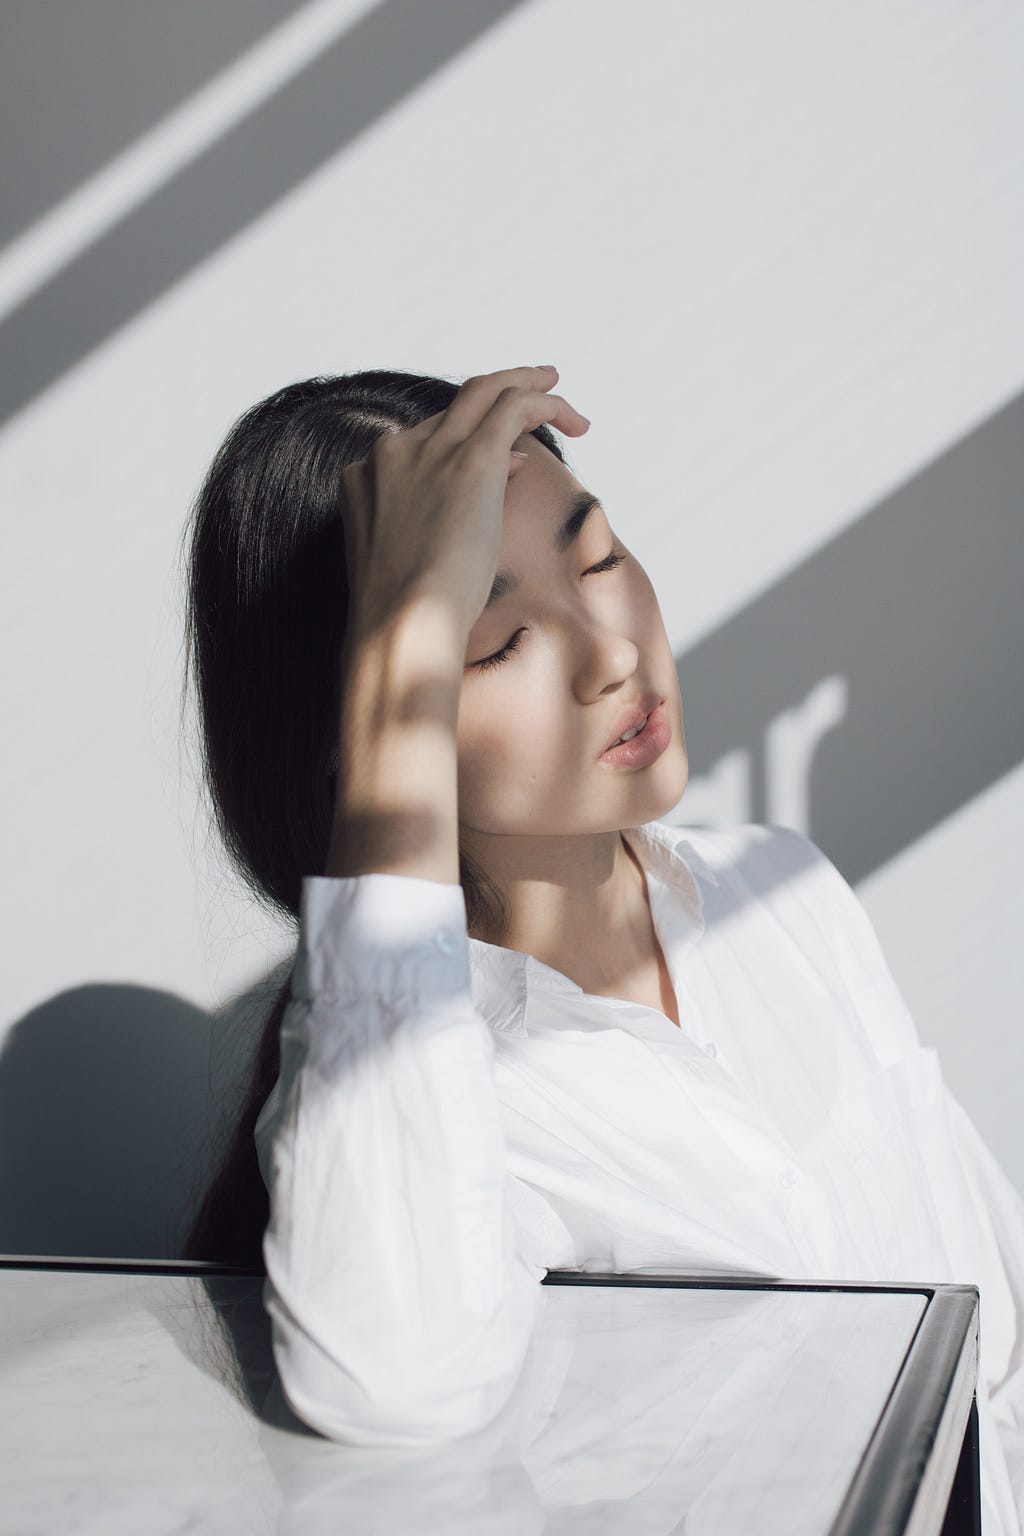 Fair-skinned young woman with neck-length straight, black hair and wearing long-sleeved white blouse. Her partially shadowed face, with eyes closed and lips partly opened, is upturned slightly sideways to the right, her right arm resting on a counter top and right hand on her forehead, as if massaging it.